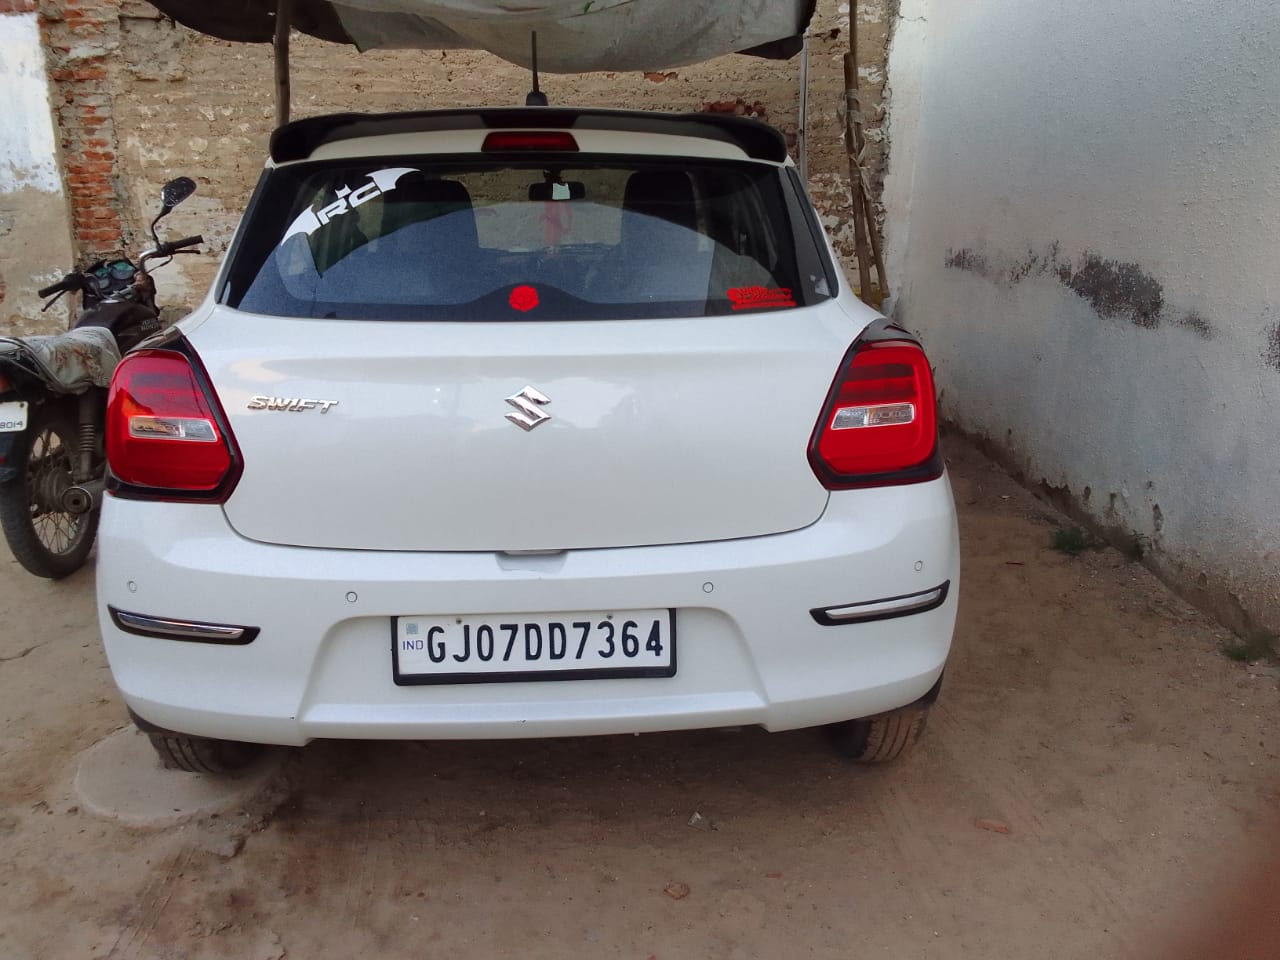 Details View - Maruti Suzuki Swift photos - reseller,reseller marketplace,advetising your products,reseller bazzar,resellerbazzar.in,india's classified site,Maruti Suzuki Swift , Old Maruti Suzuki Swift, Used Maruti Suzuki Swift in Ahmedabad , Maruti Suzuki Swift in Ahmedabad